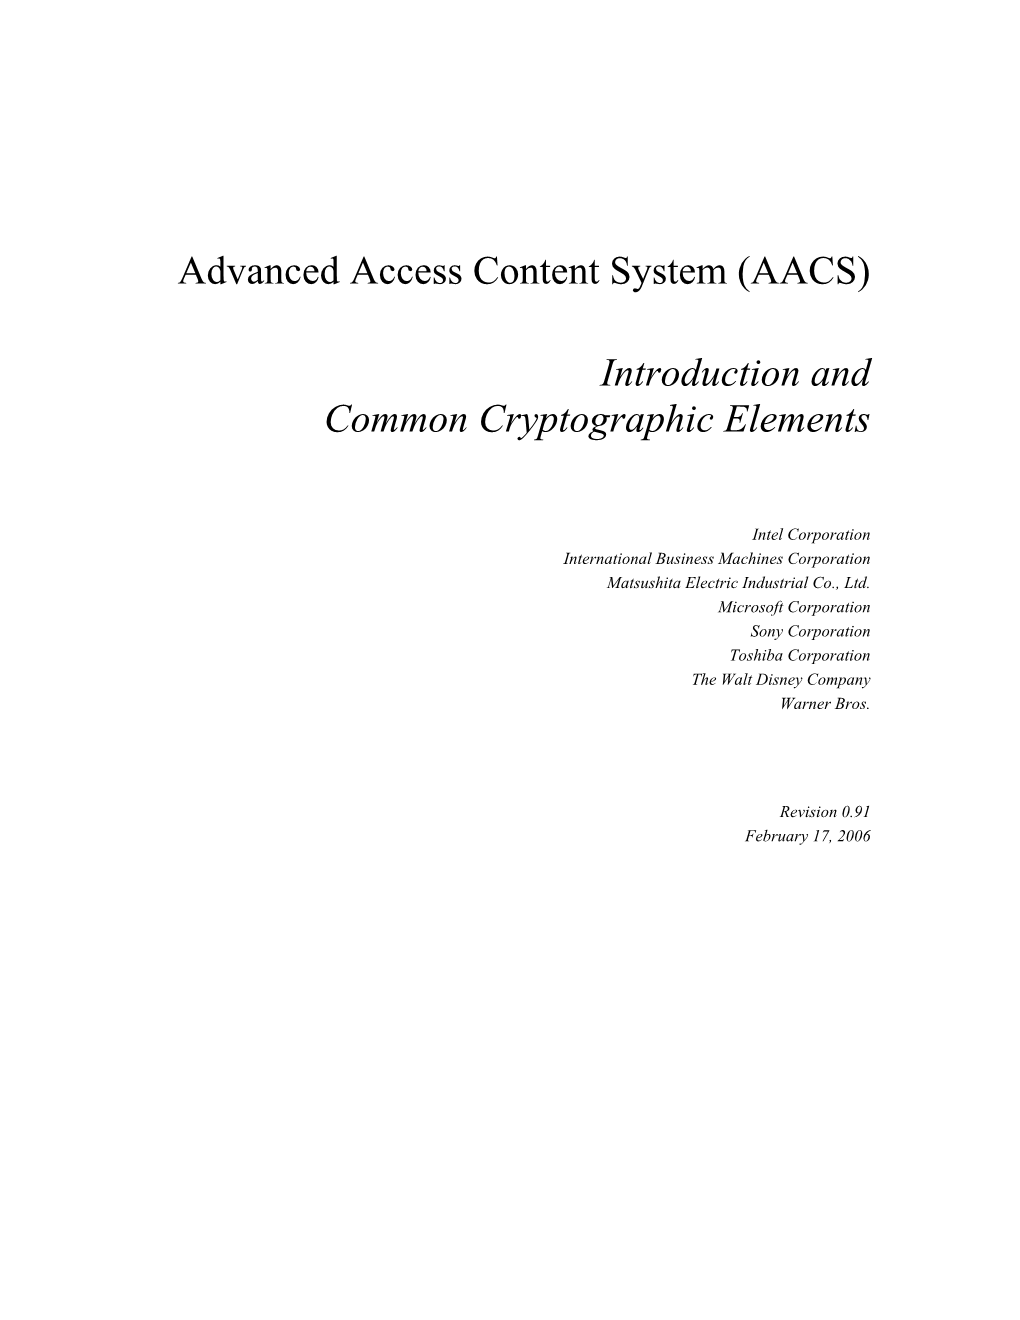 (AACS) Introduction and Common Cryptographic Elements